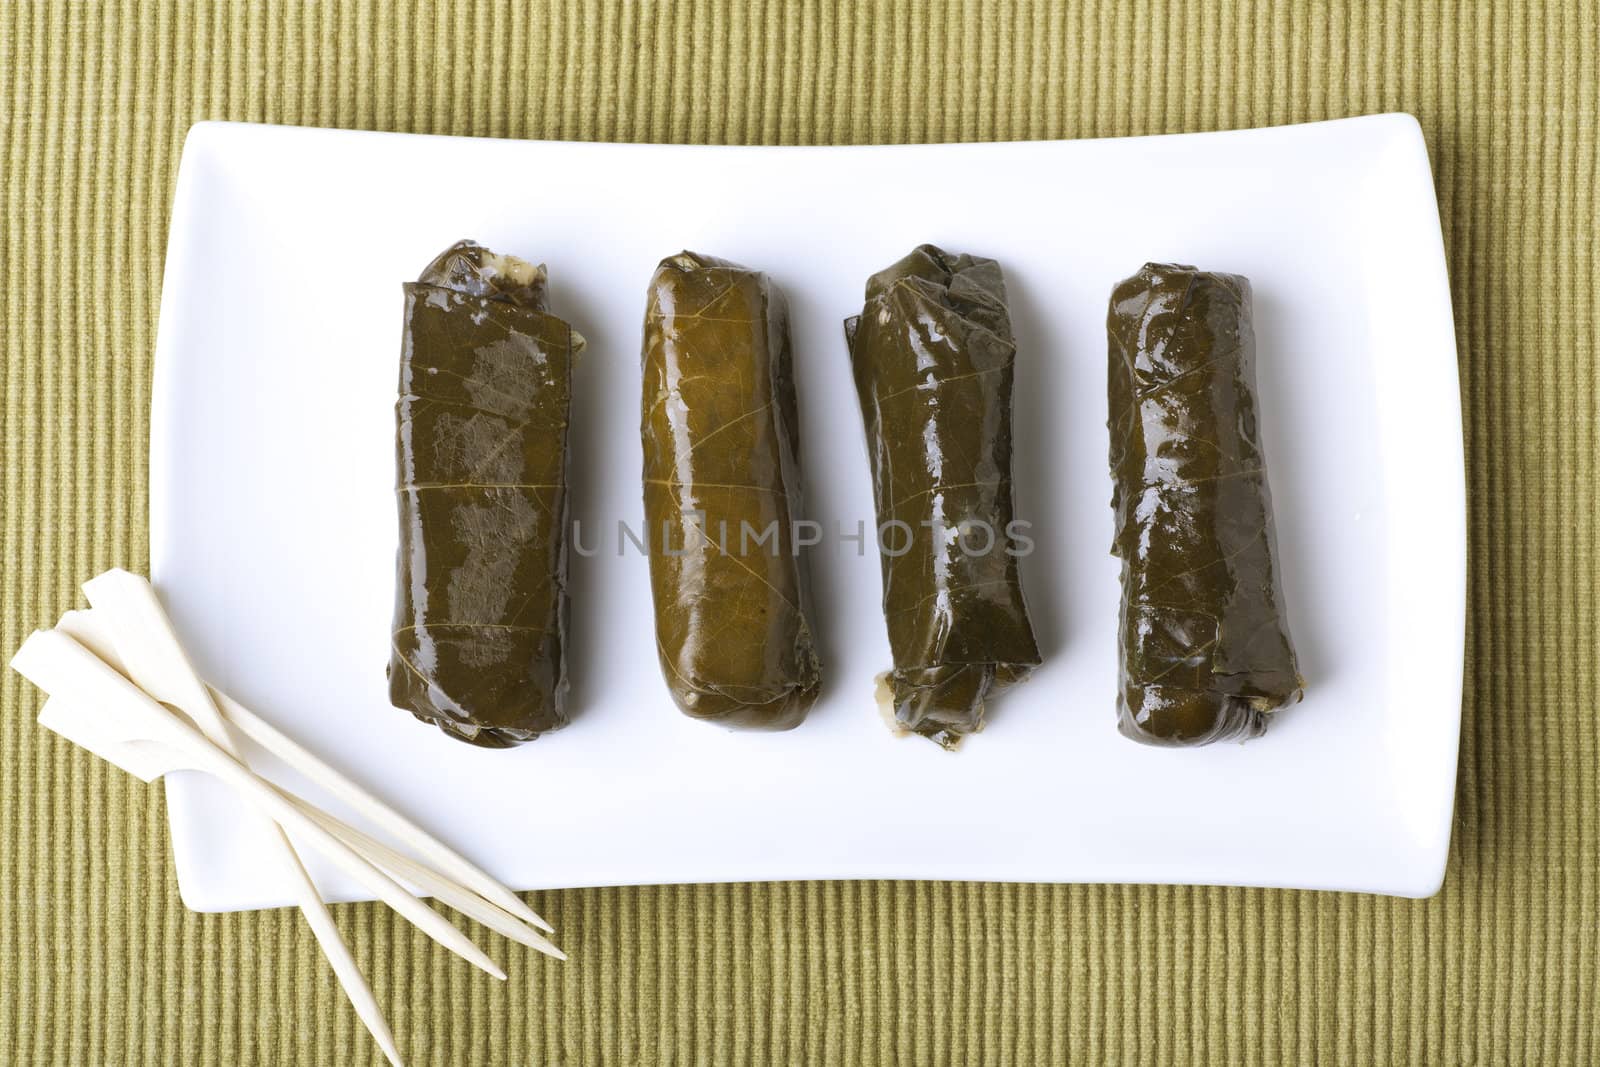 Appetizers: fresh grape leaves stuffed with rice.